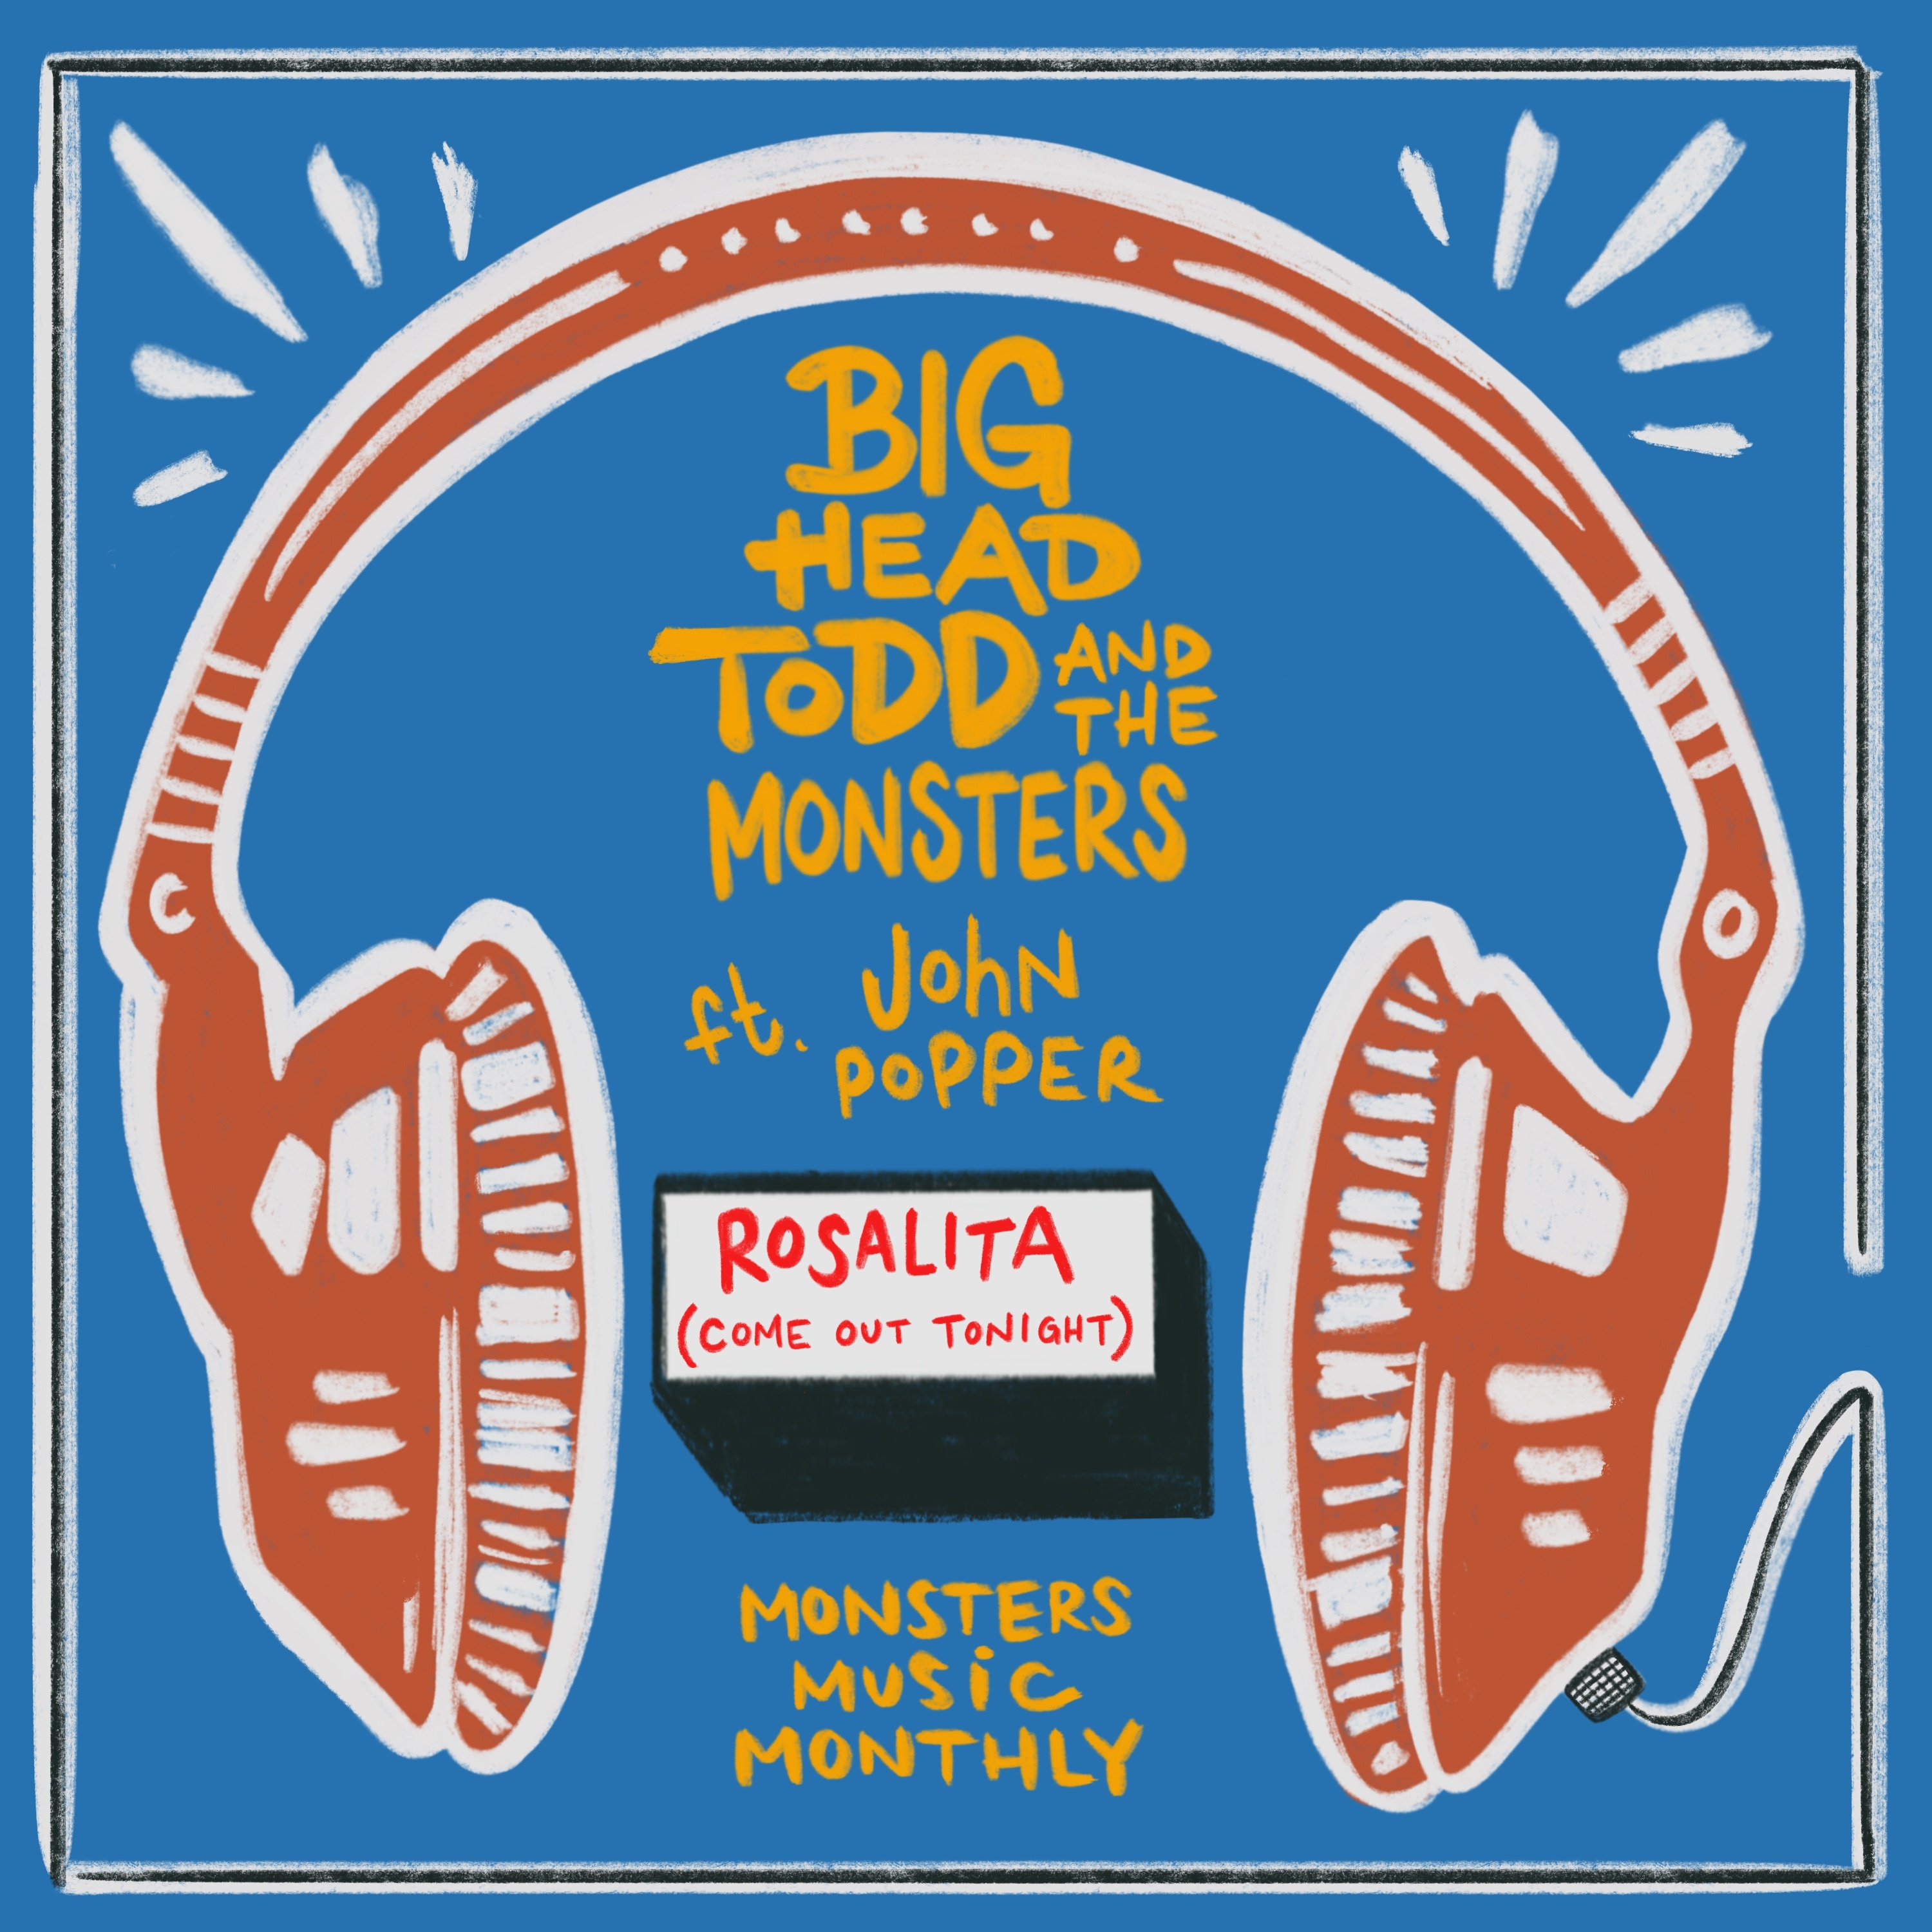 Fresh BHTM Release: Rosalita (Come Out Tonight) feat. John Popper!